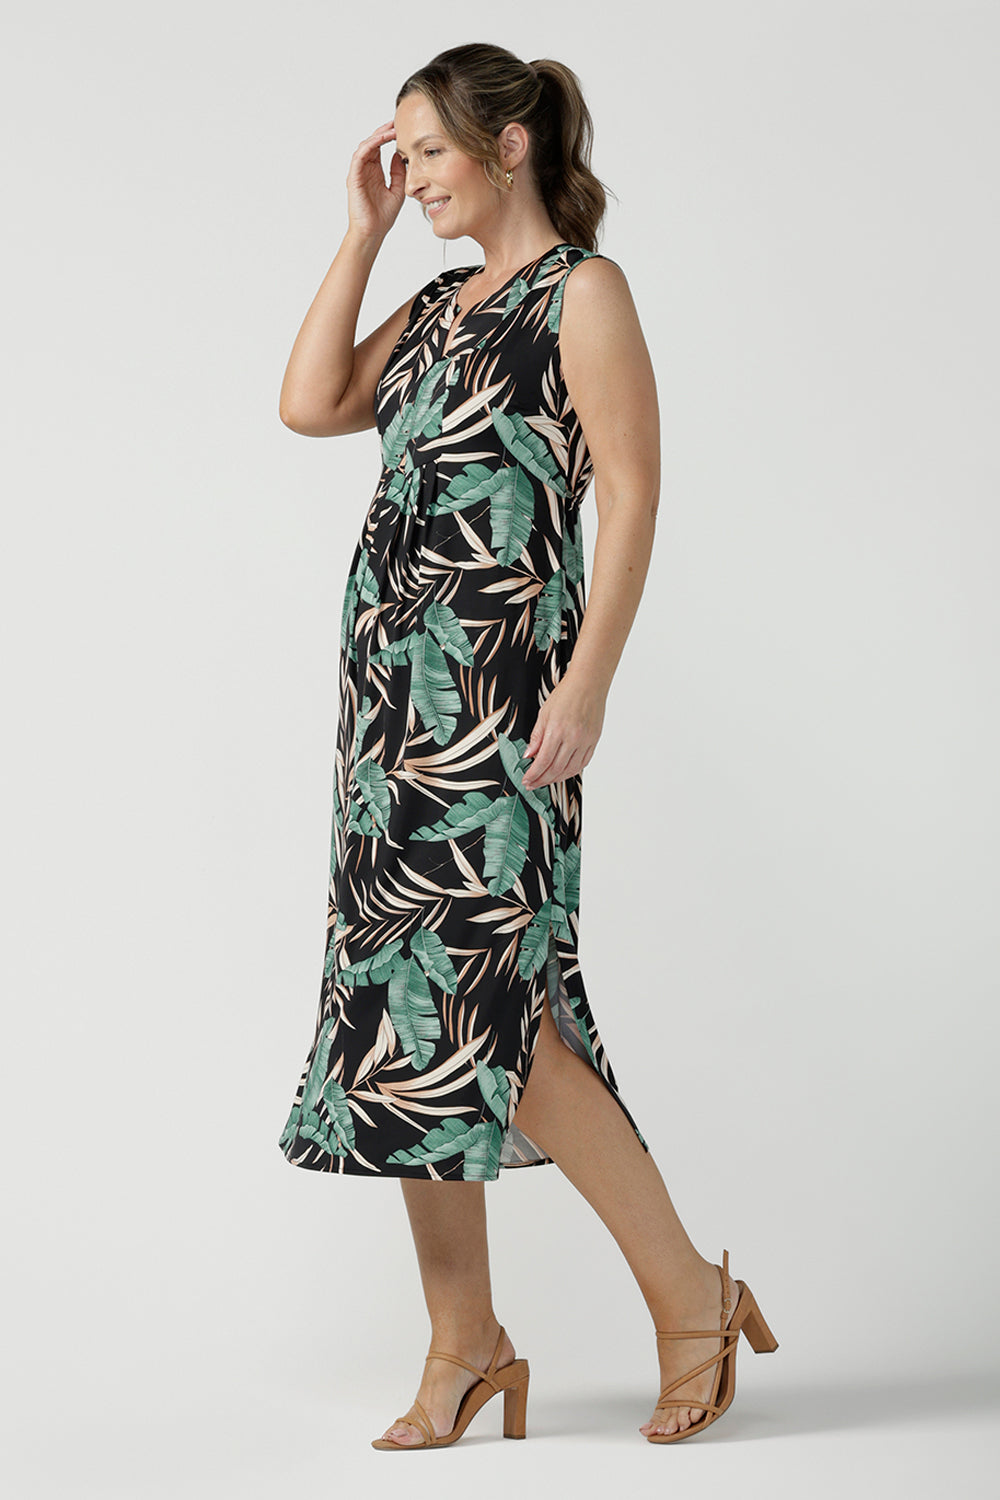 Women's curvy fashion pictured on a size 8. A Tropical printed dress in a sleeveless design with pleated front and v-neckline. Australian made in size 8 - 24. 